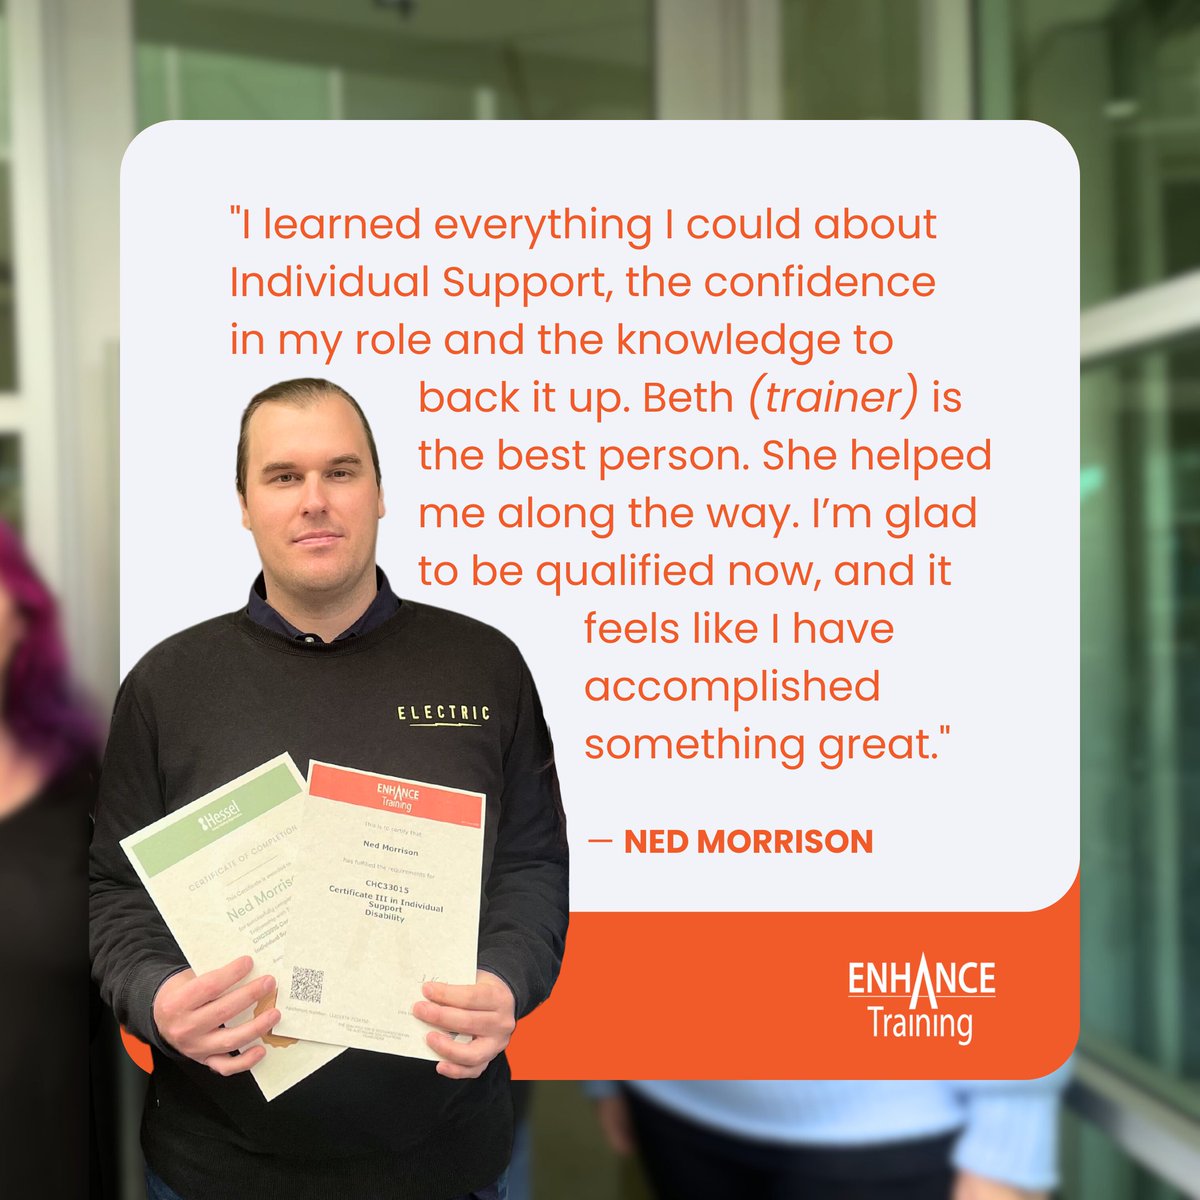 #Congratulations Ned — another confident, qualified, skilled & passionate #SupportWorker🙌 
Are you looking for a new direction? Cert III in Individual Support (Disability) CHC33015 could be the new start you need!
hubs.ly/Q0203gnb0
#EnhanceTraining #NationalSkillsWeek